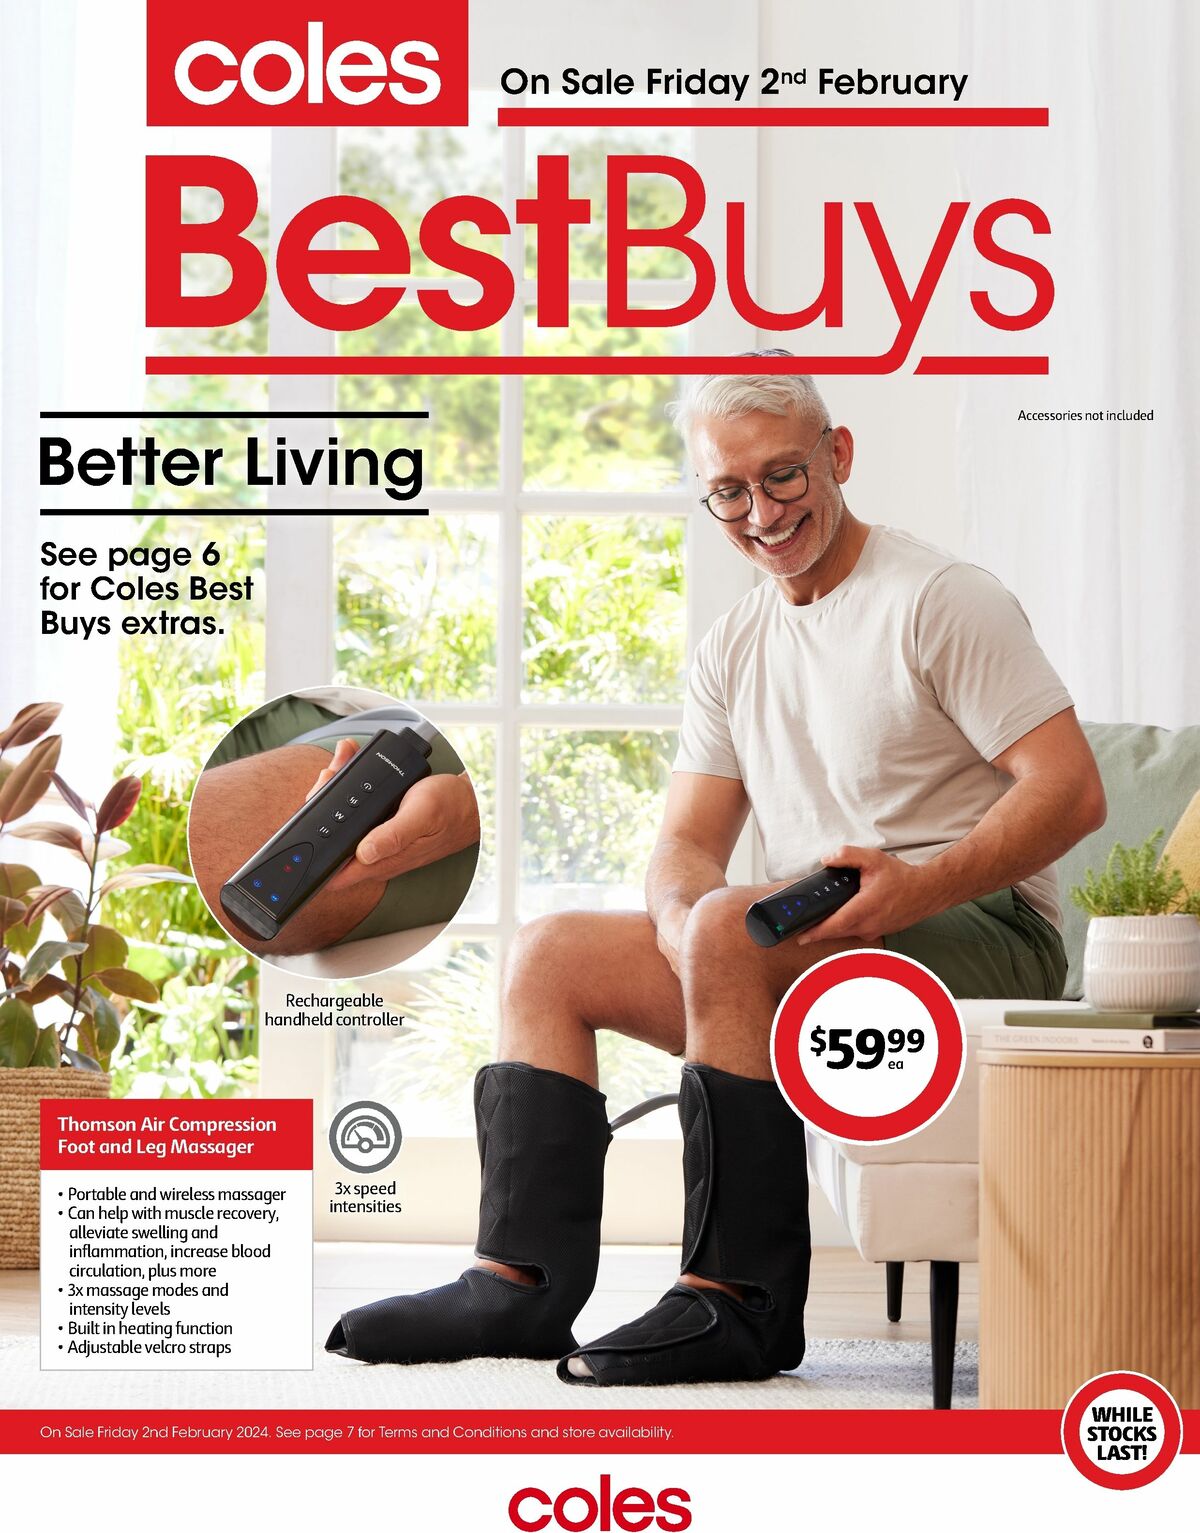 Coles Best Buys - Better Living Catalogues from 2 February